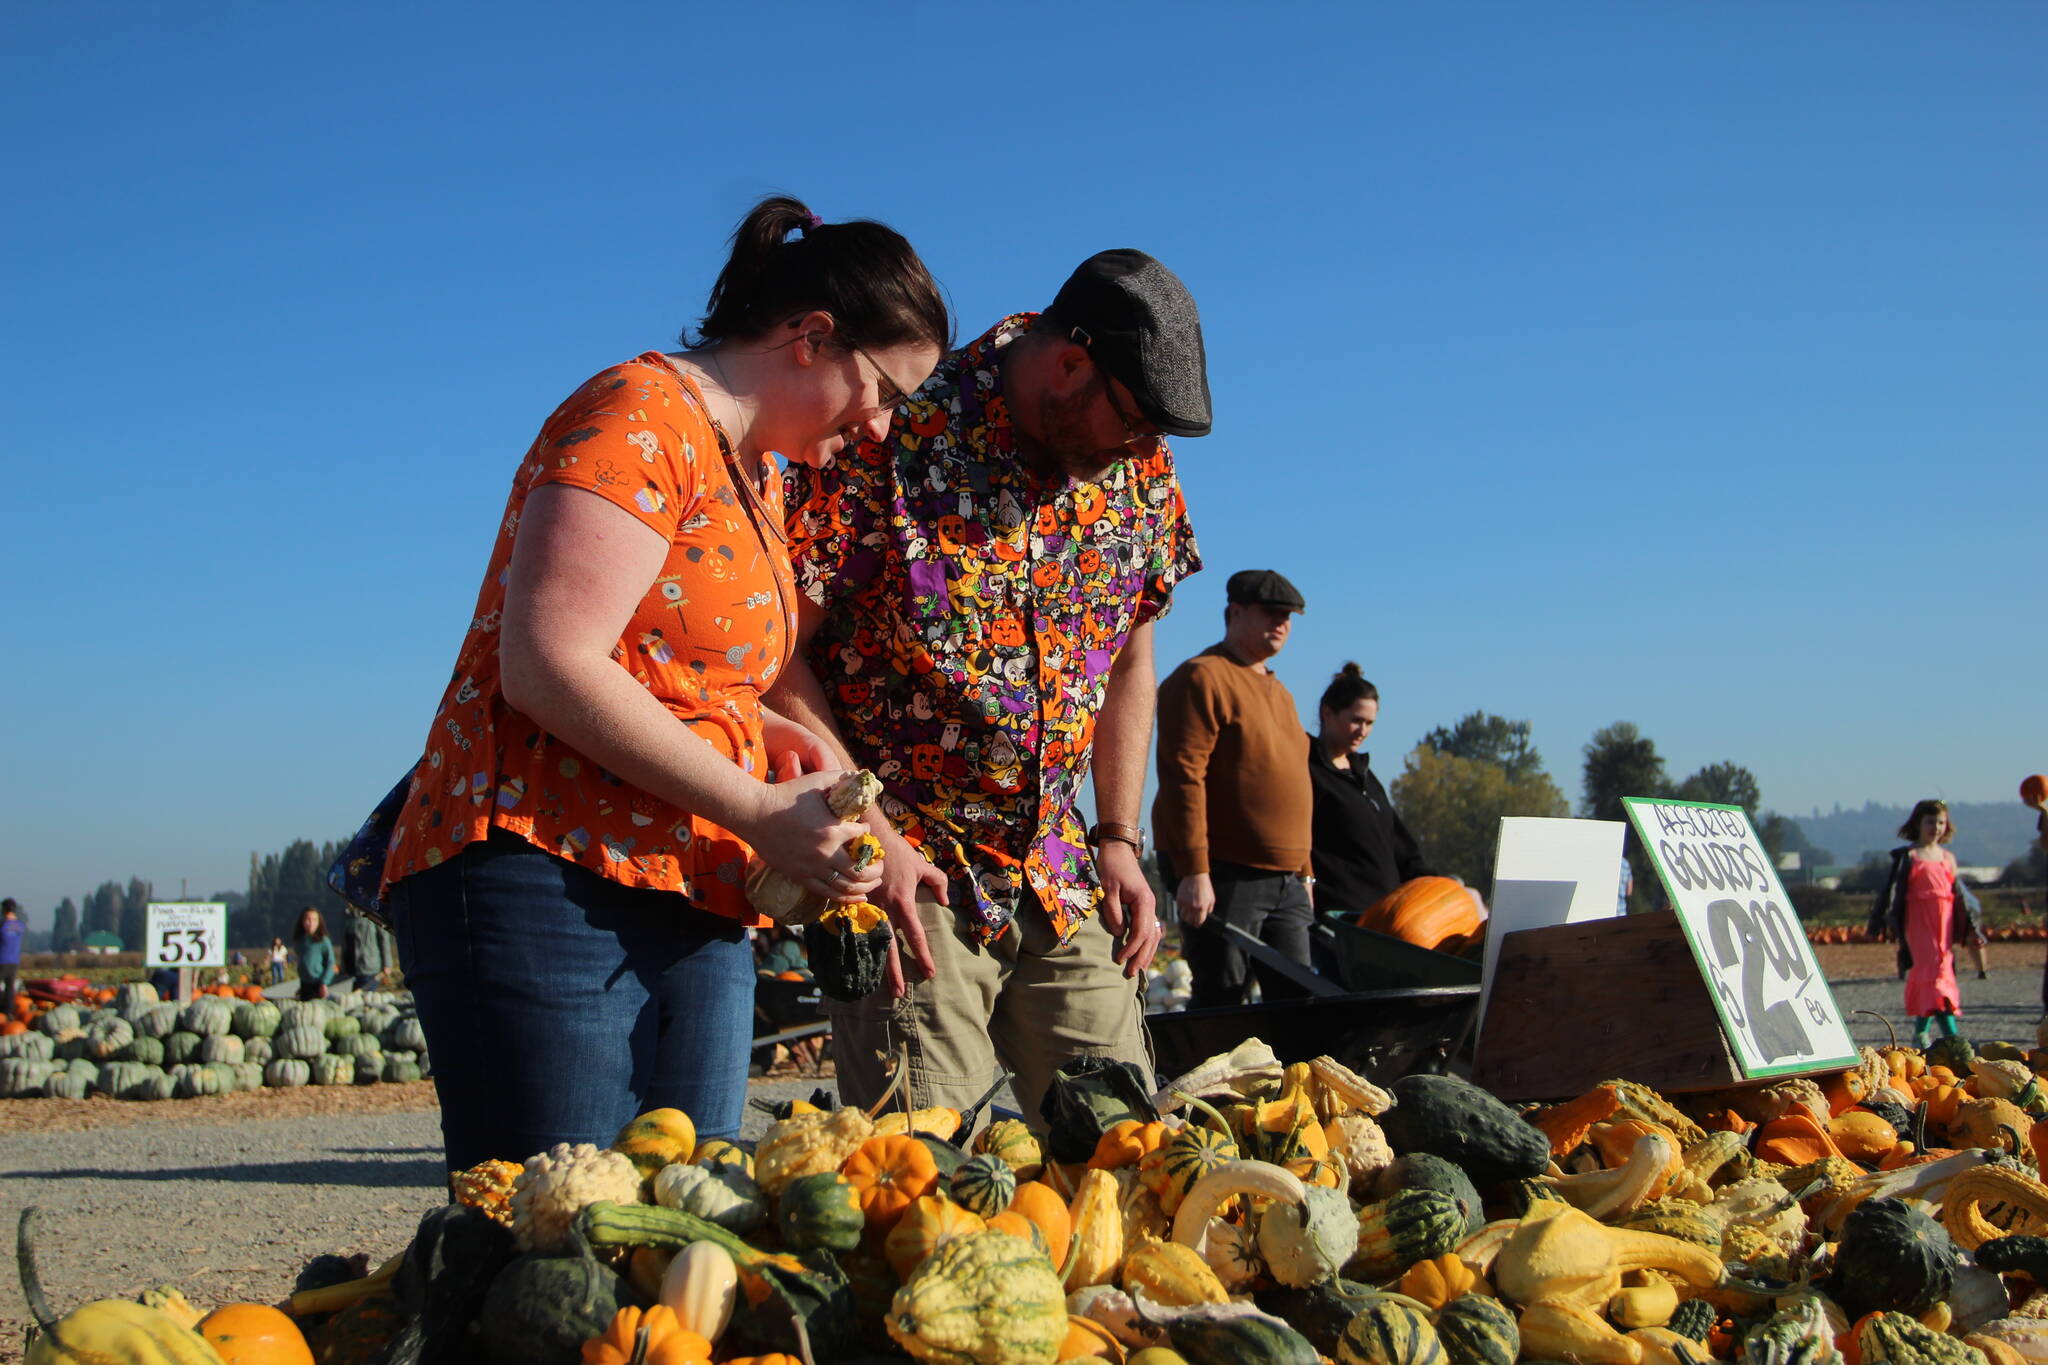 Cassandra and Scott Atkinson of Kent survey gourds on Oct. 16. They visit the Carpinitos’ pumpkin patch every year. 
Olivia Sullivan
Sound Publishing